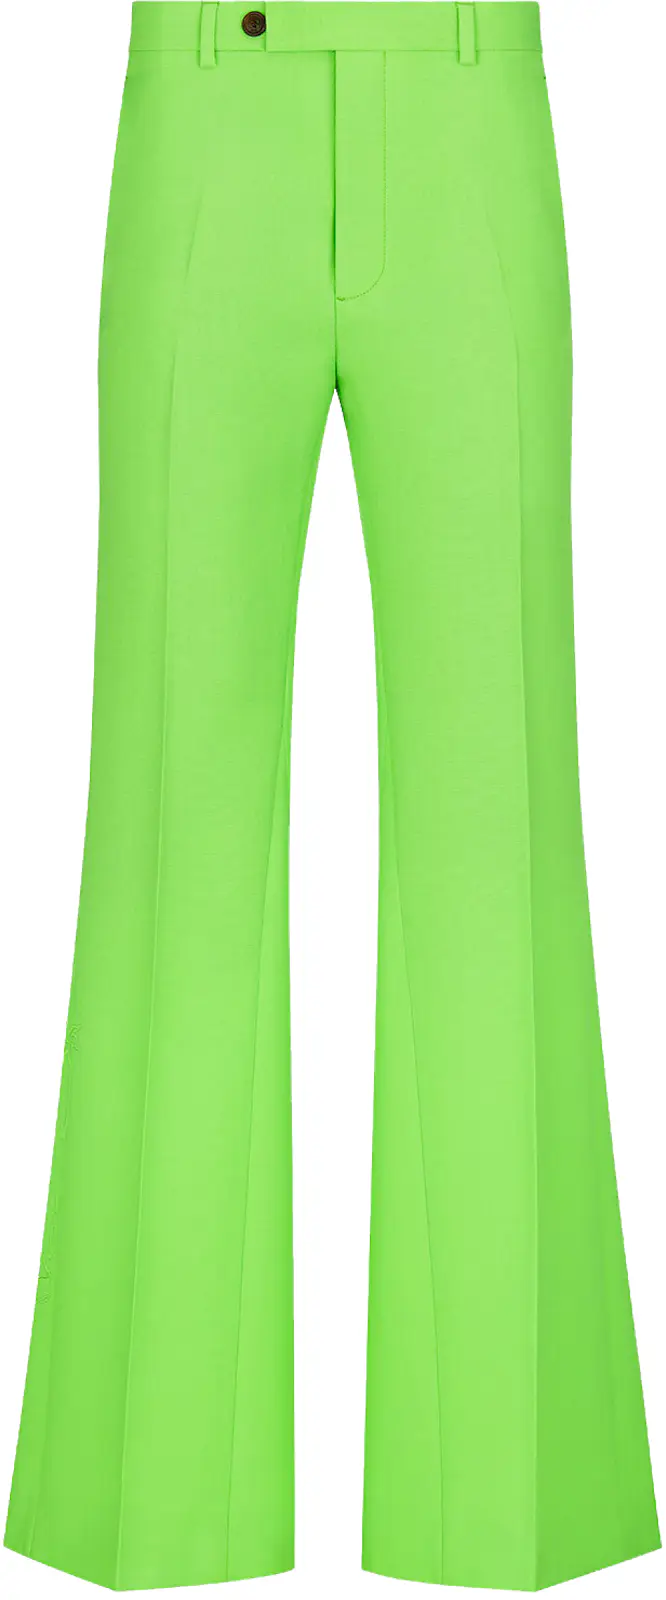 Dior x CACTUS JACK Flared Pants Fluorescent Green - SS22